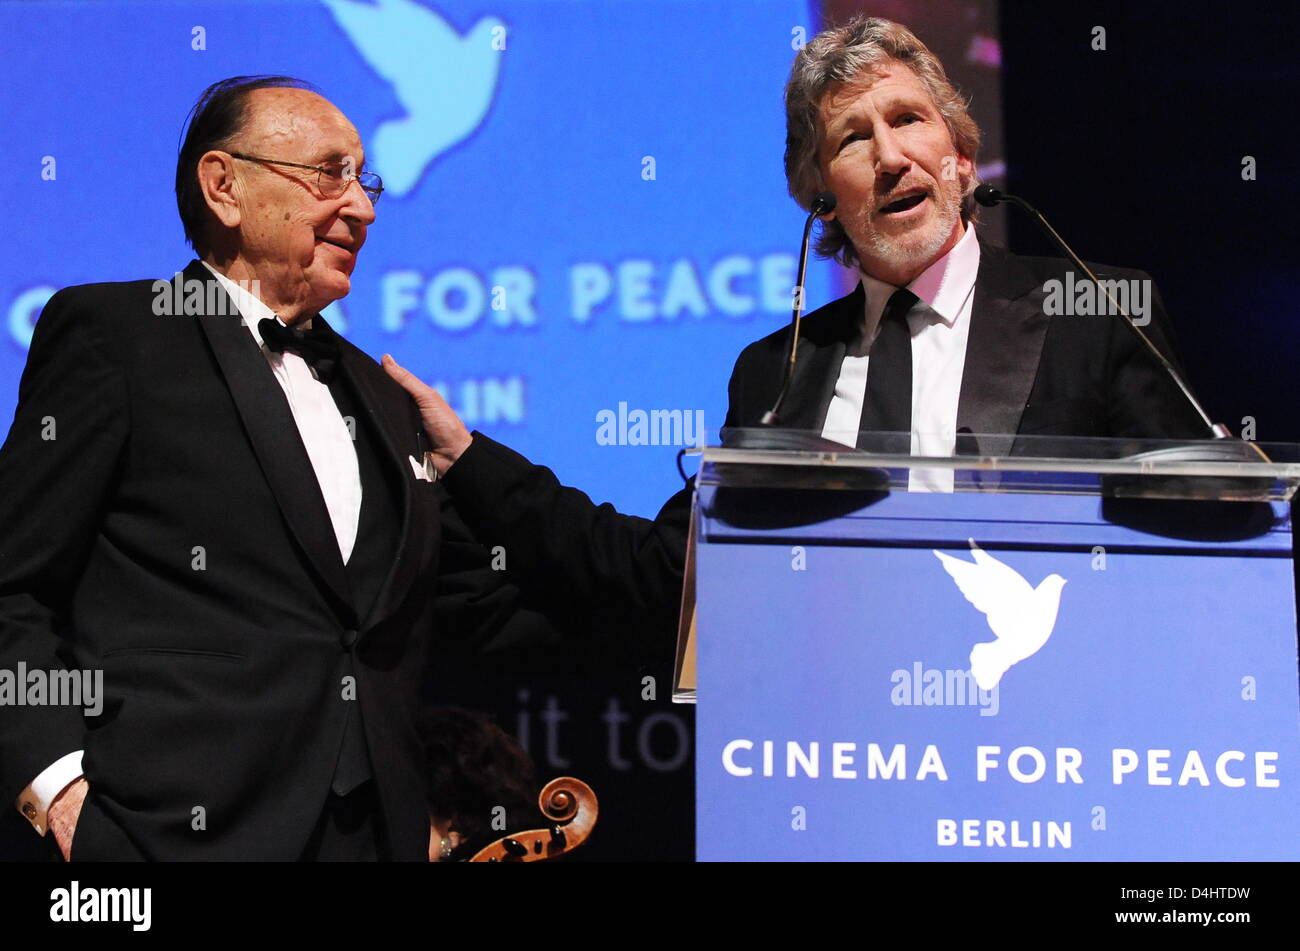 Pink-Floyd bassist Roger Waters (R) speaks next to former German Foreign Minister Hans-Dietrich Genscher at the ?Cinema for Peace? gala at the 59th Berlin International Film Festival in Berlin, Germany, 09 February 2009. ?Cinema for Peace? is a worldwide initiative promoting humanity through film. Members of the international film community have created a platform for peace and tol Stock Photo